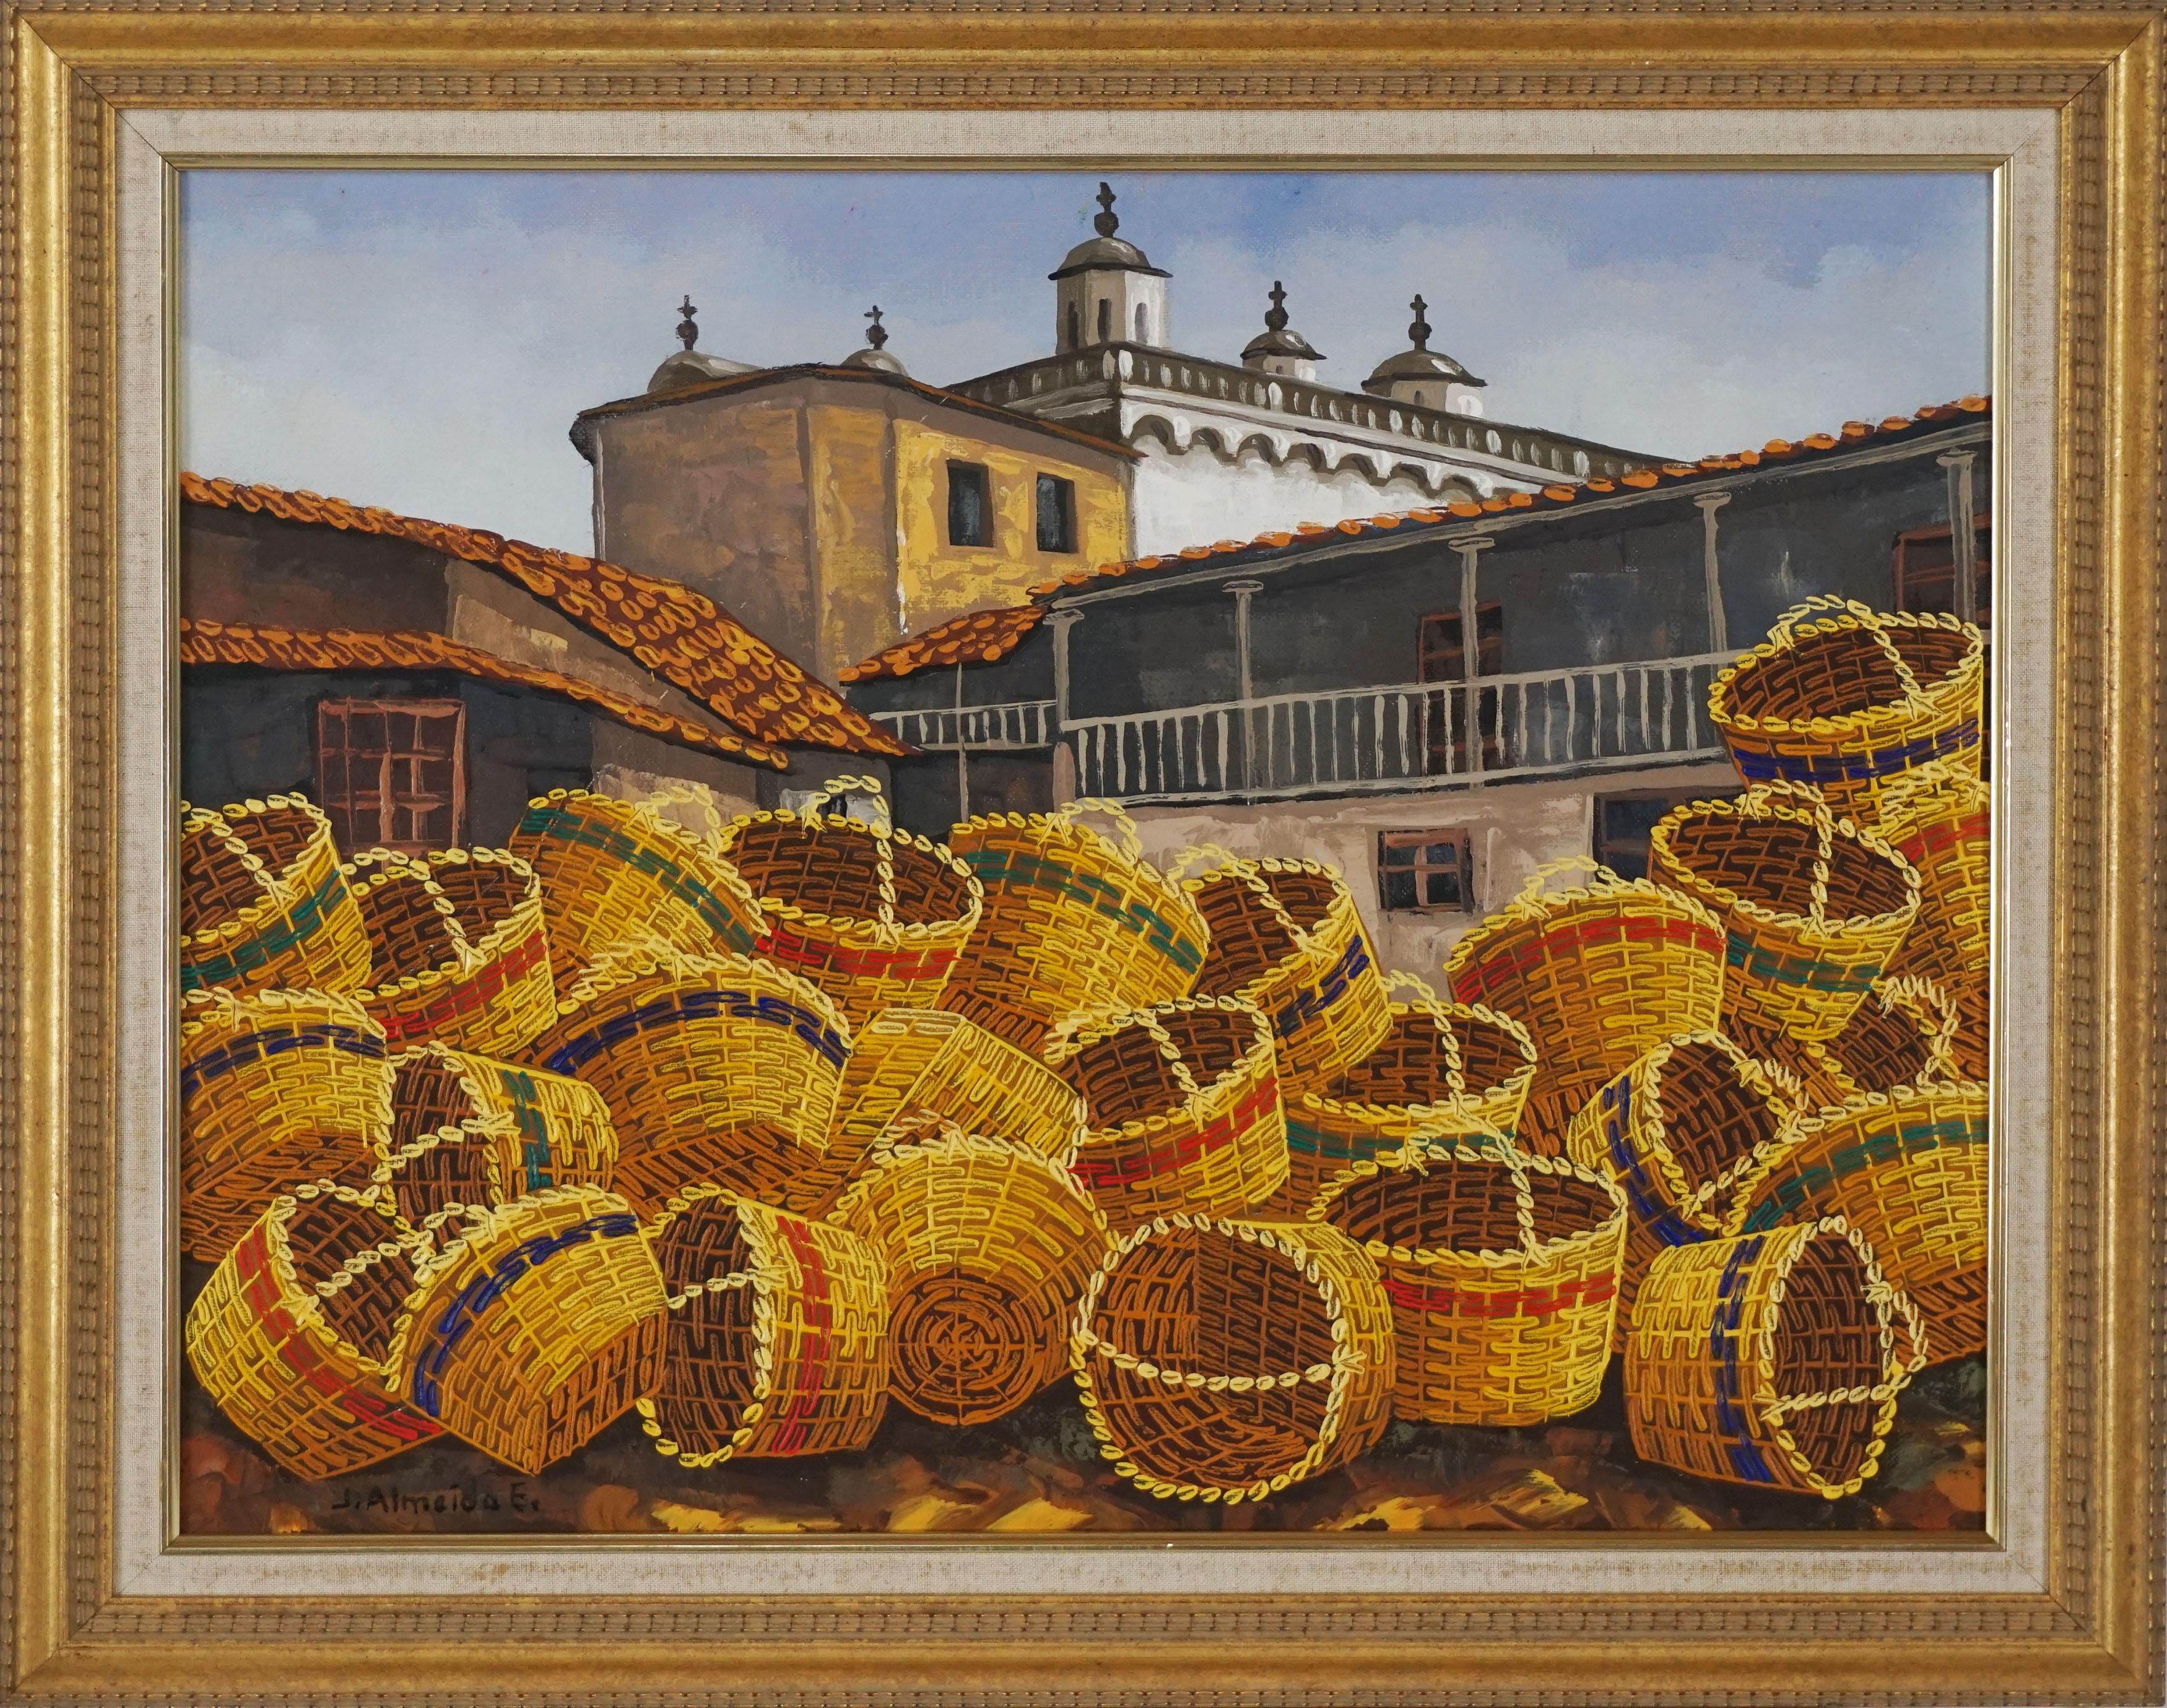 Market Baskets in Old Town - Painting by J Almeida E